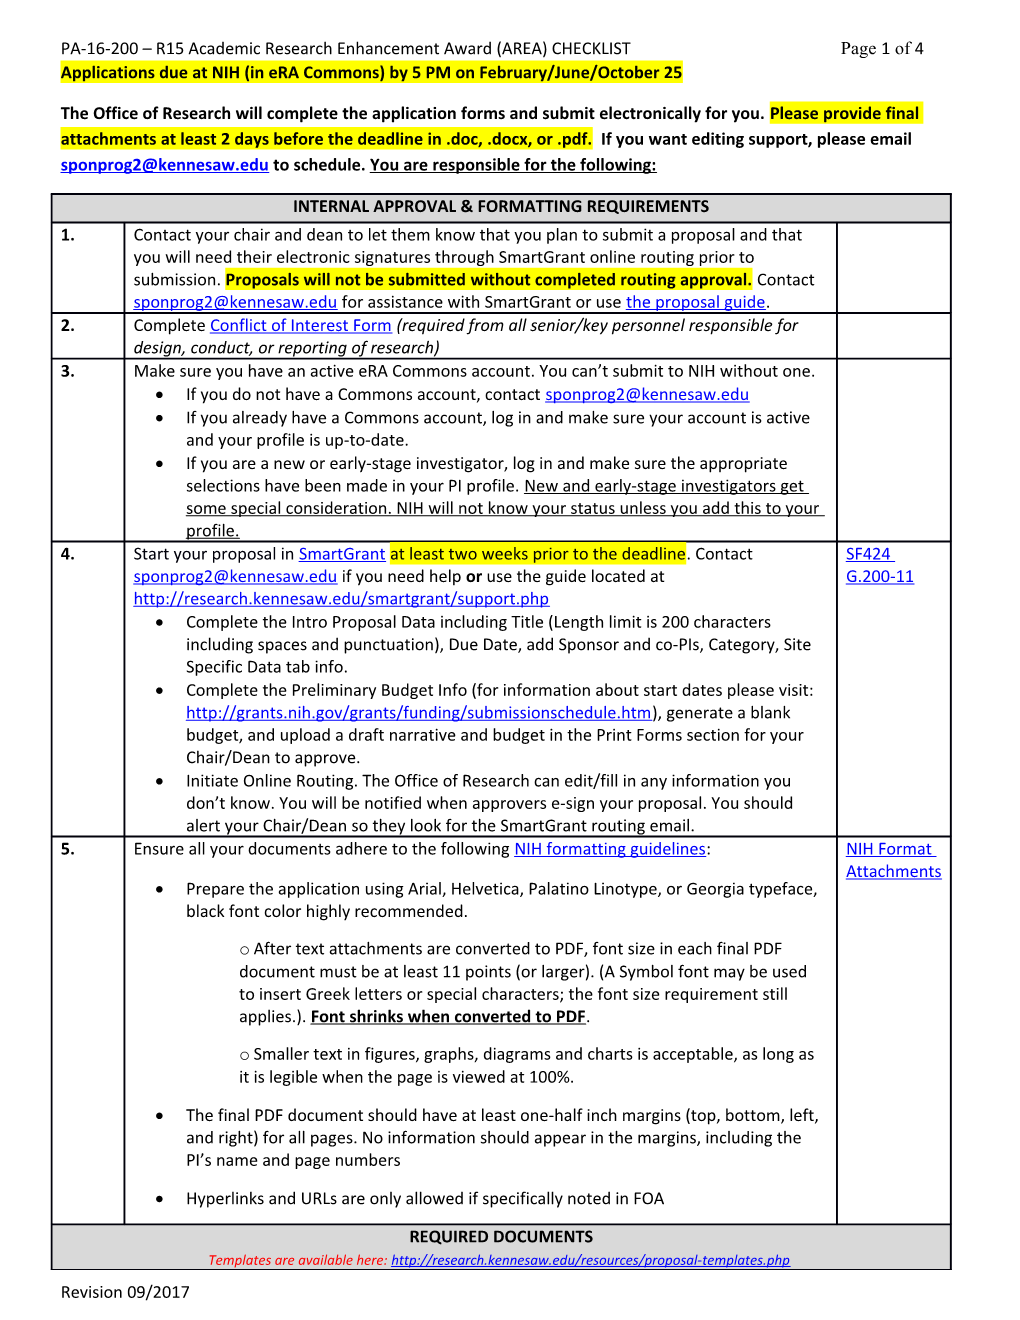 PA-16-200 R15 Academic Research Enhancement Award (AREA) Checklistpage 1 of 4